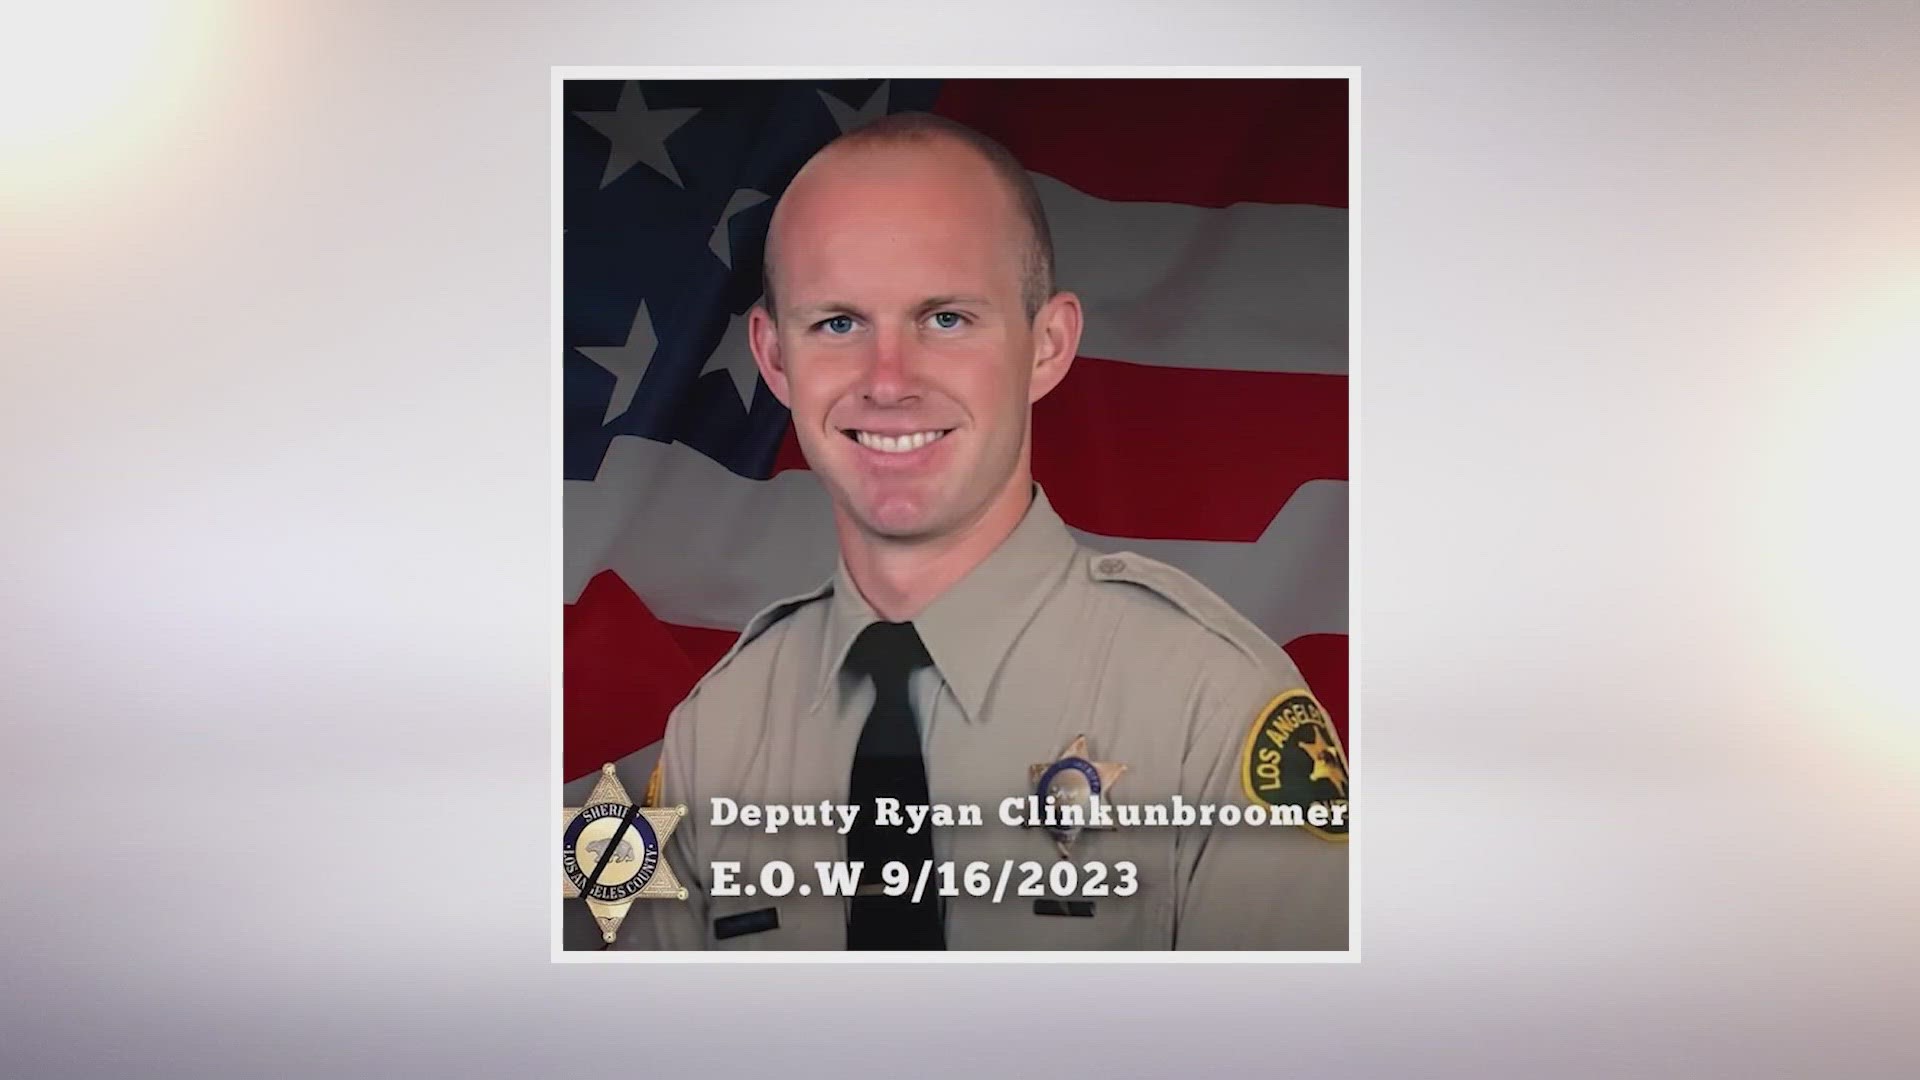 Deputy Ryan Clinkunbroomer, 30, died at a hospital after being found unconscious in the vehicle while on duty around 6 p.m. Saturday in the city of Palmdale.